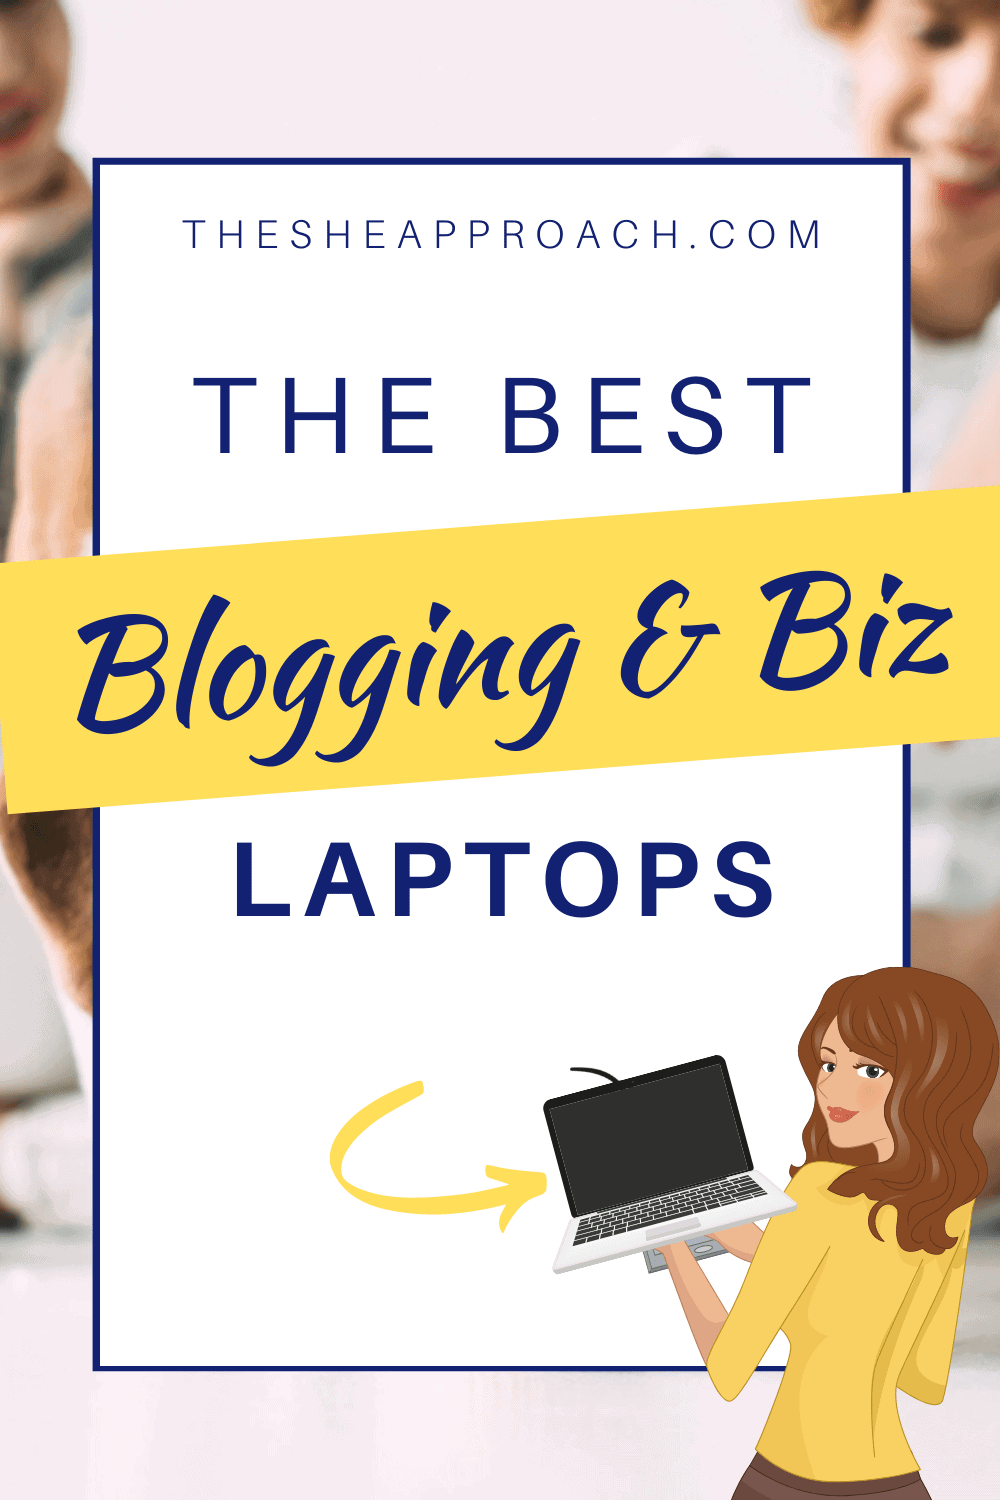 Best Laptops For Bloggers - Top 2022 Laptops That You Can Blog On